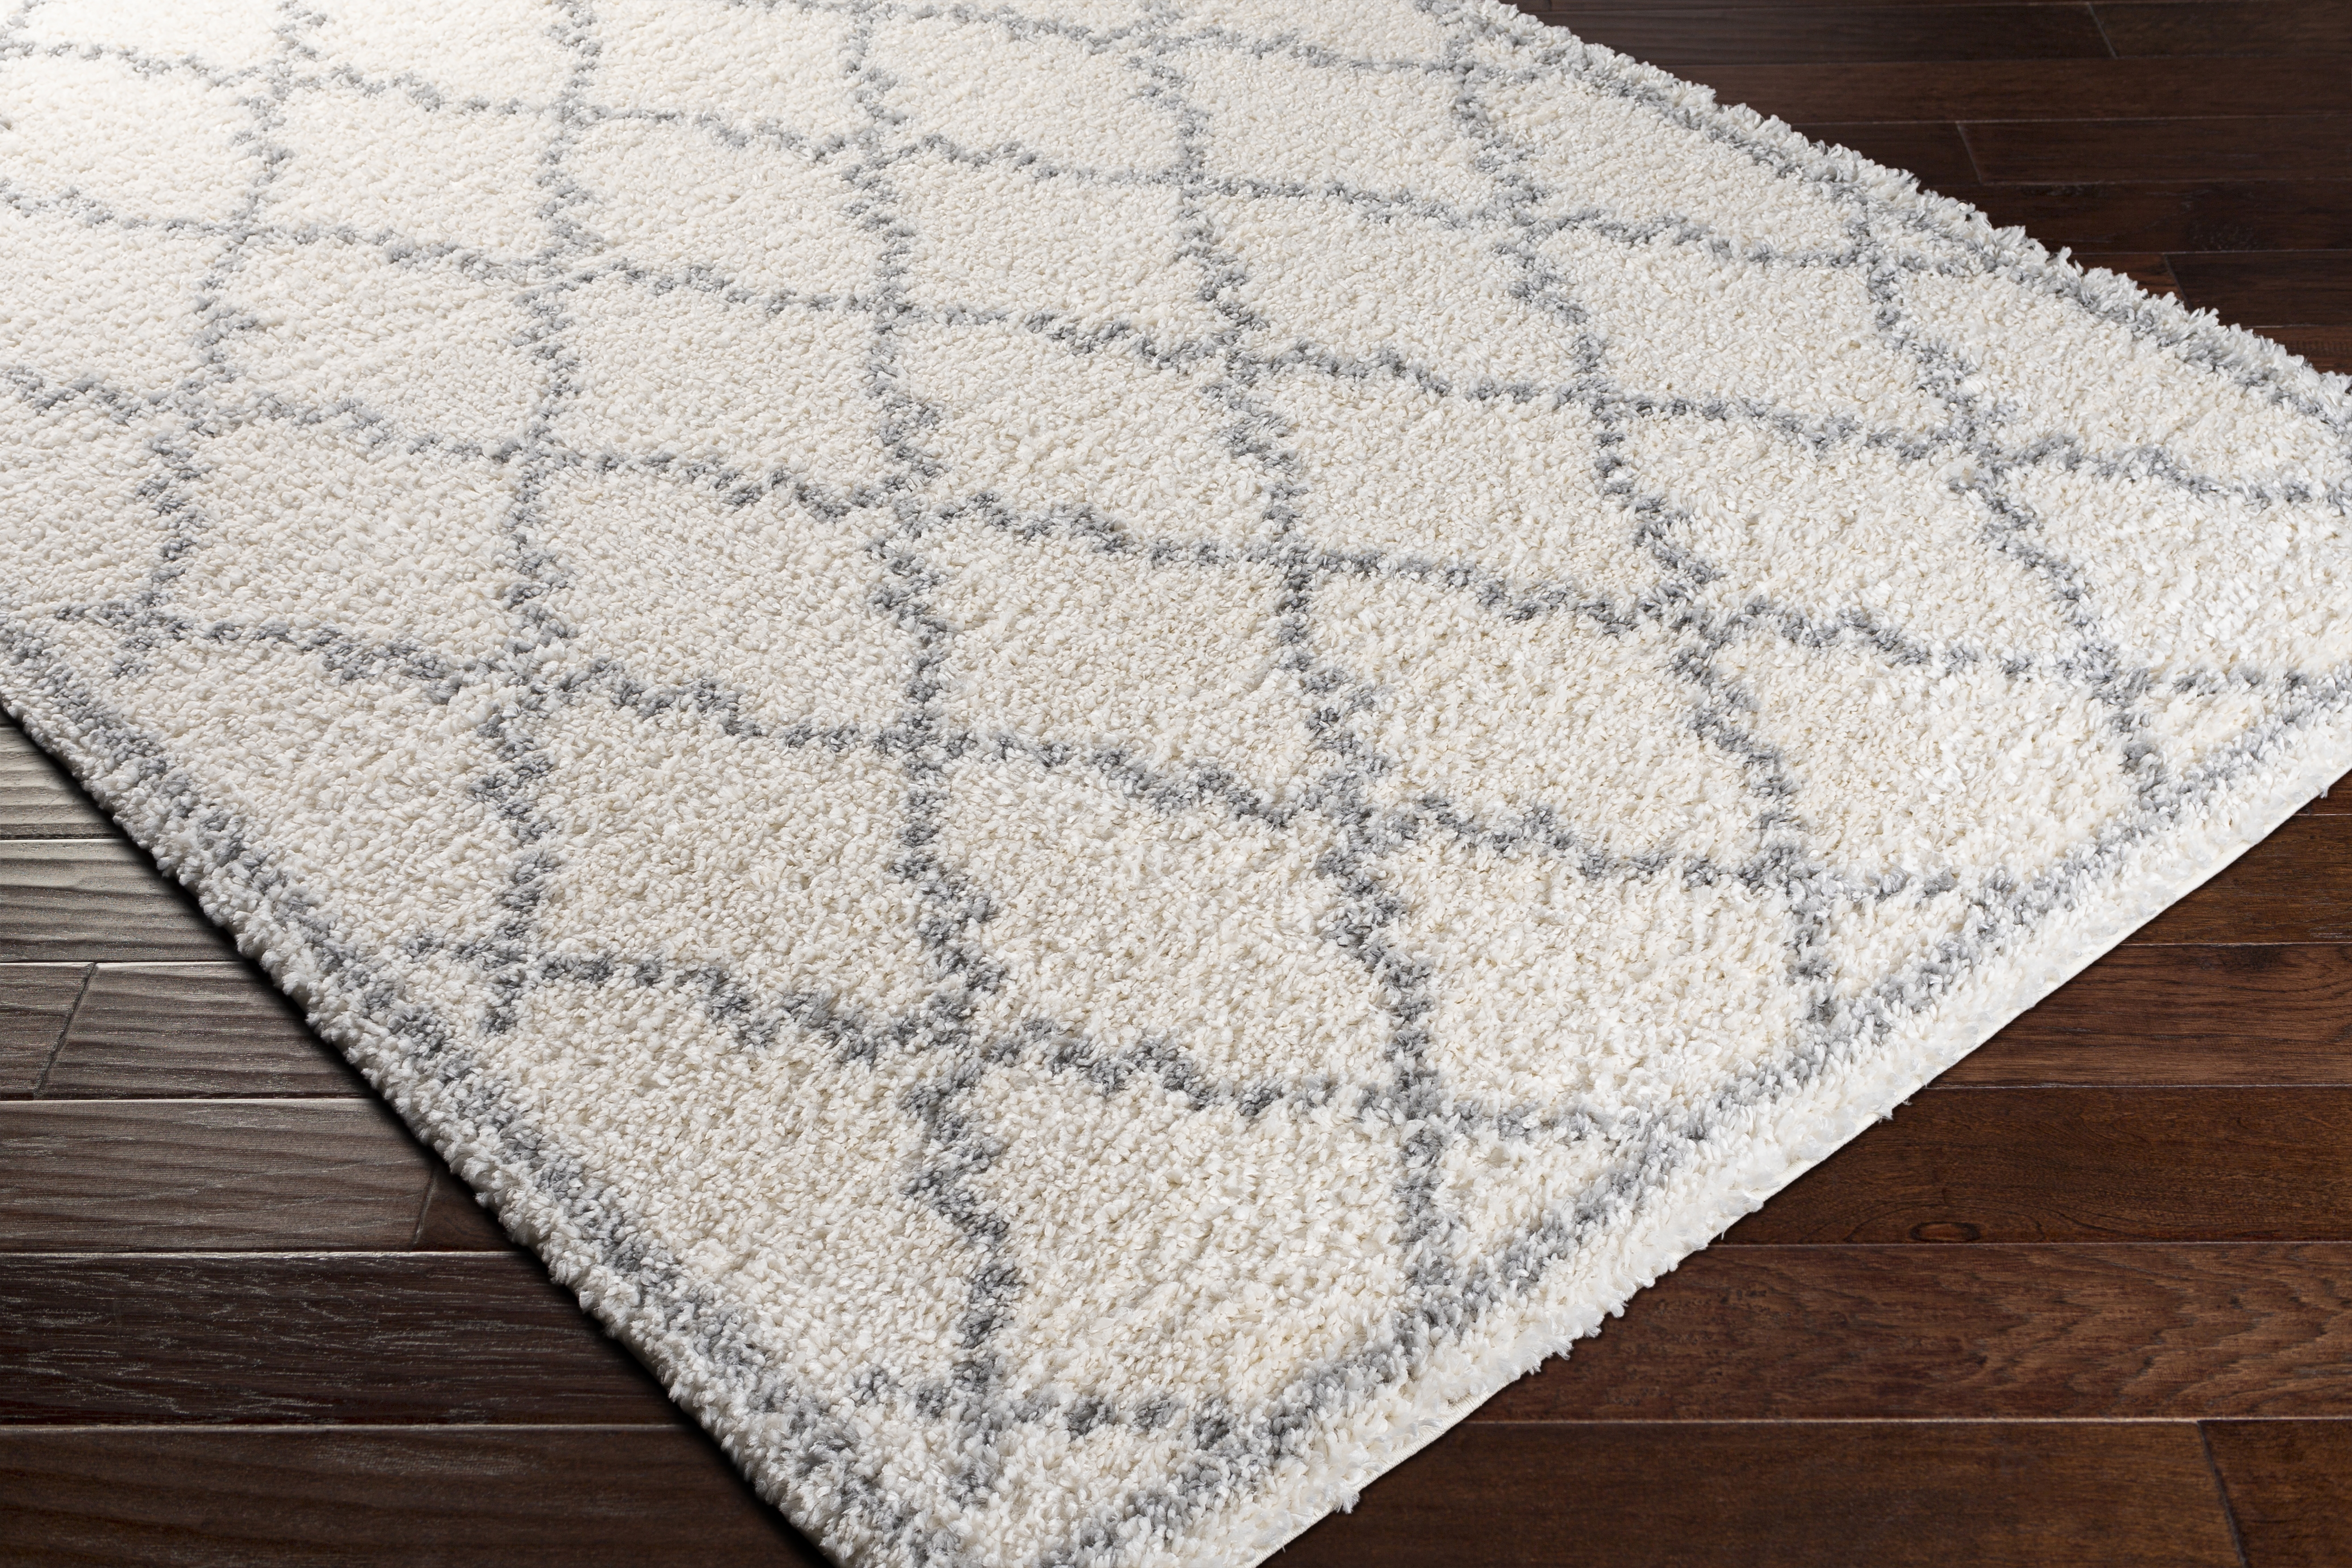 Deluxe Shag Rug, 5'3" x 7'3" - Image 6